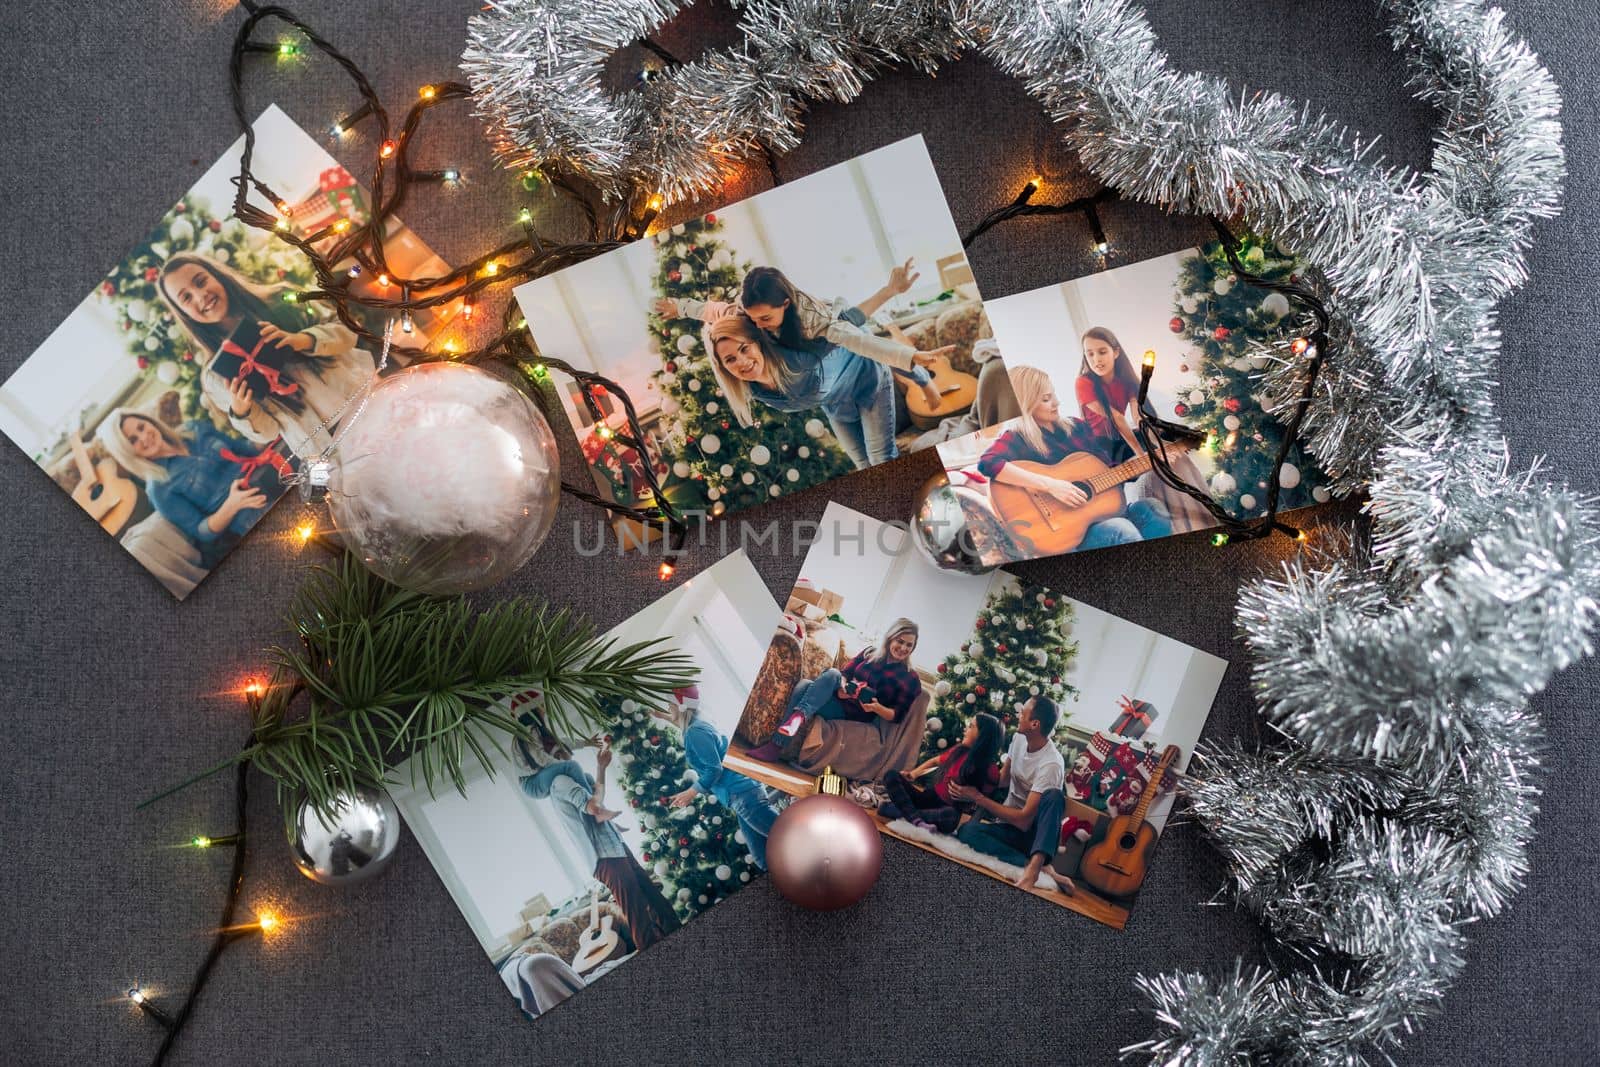 collection of Christmas photos with family, decor by Andelov13